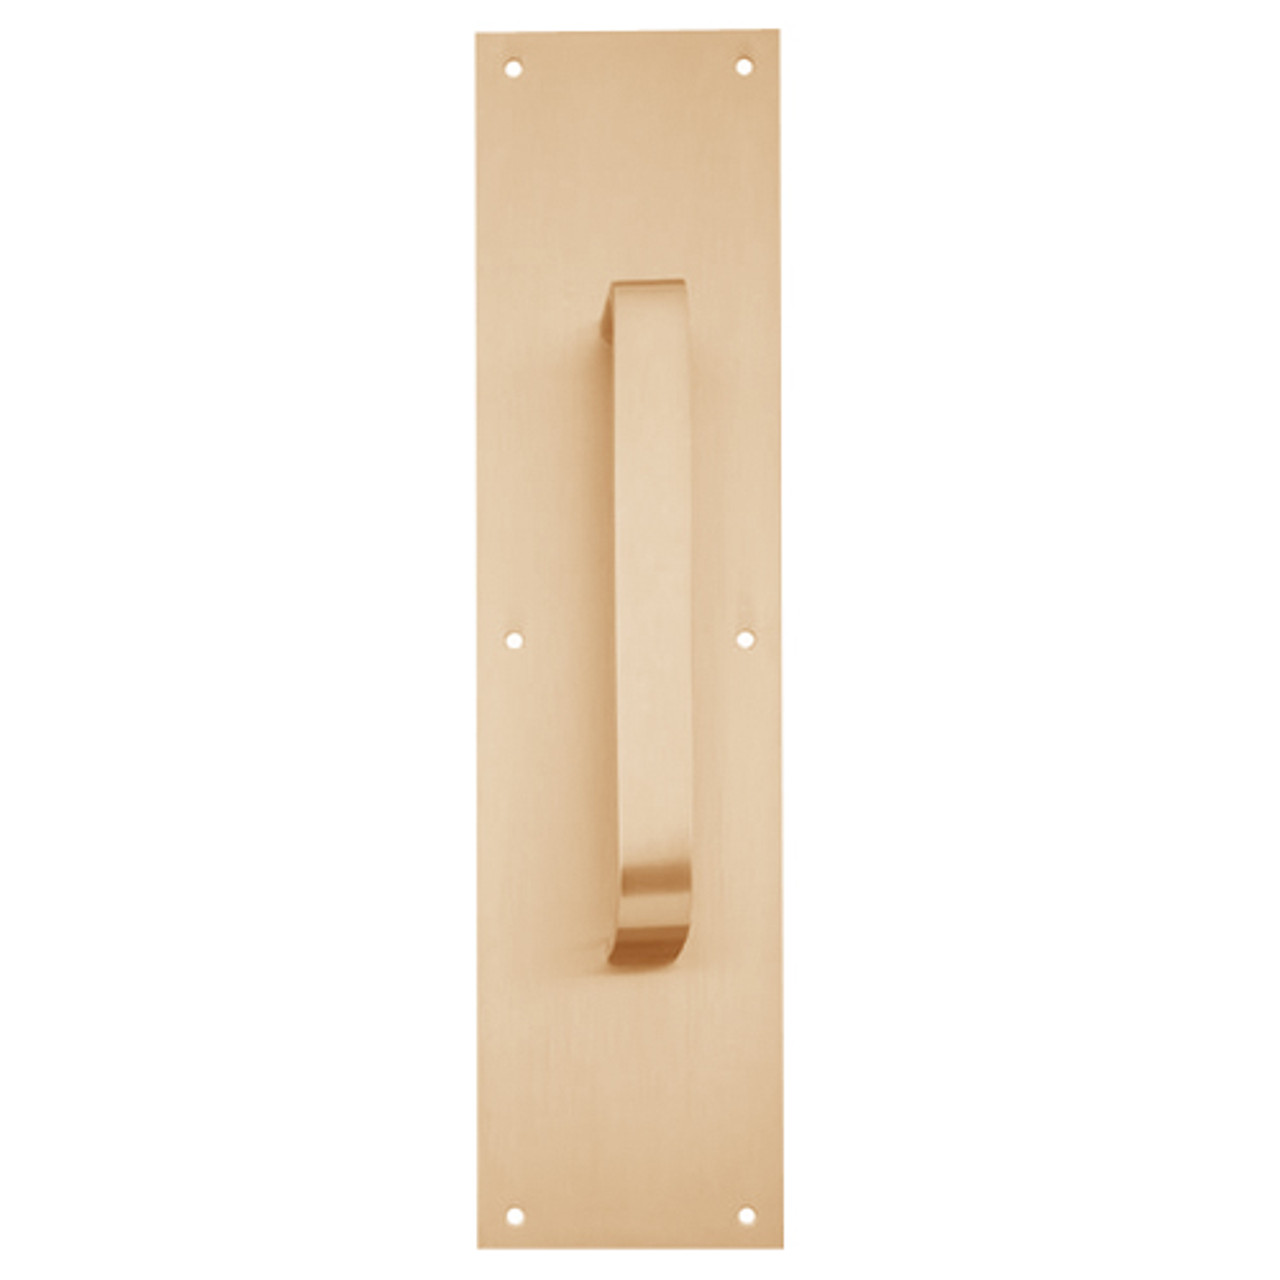 8305-8-US10-4x16 IVES Architectural Door Trim 4x16 Inch Pull Plate in Satin Bronze